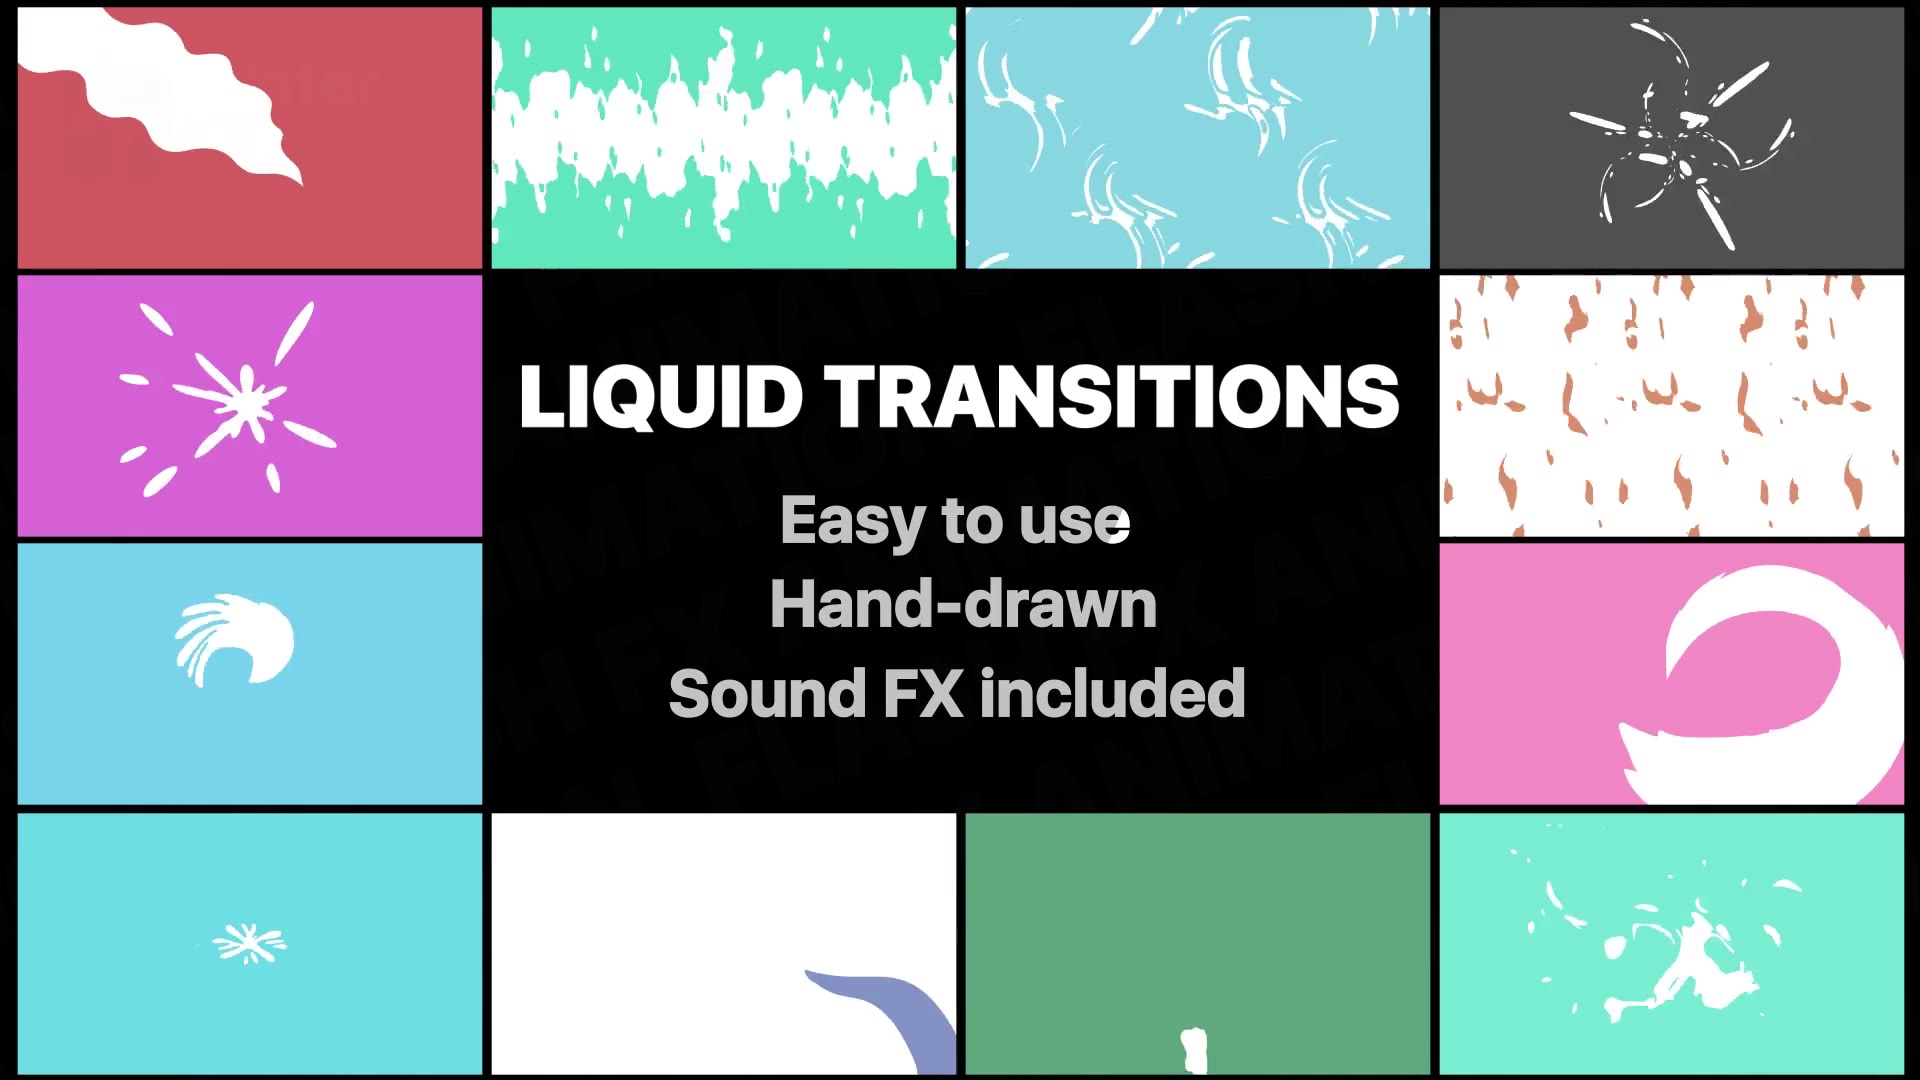 Liquid Transitions Pack - Download Videohive 22776086